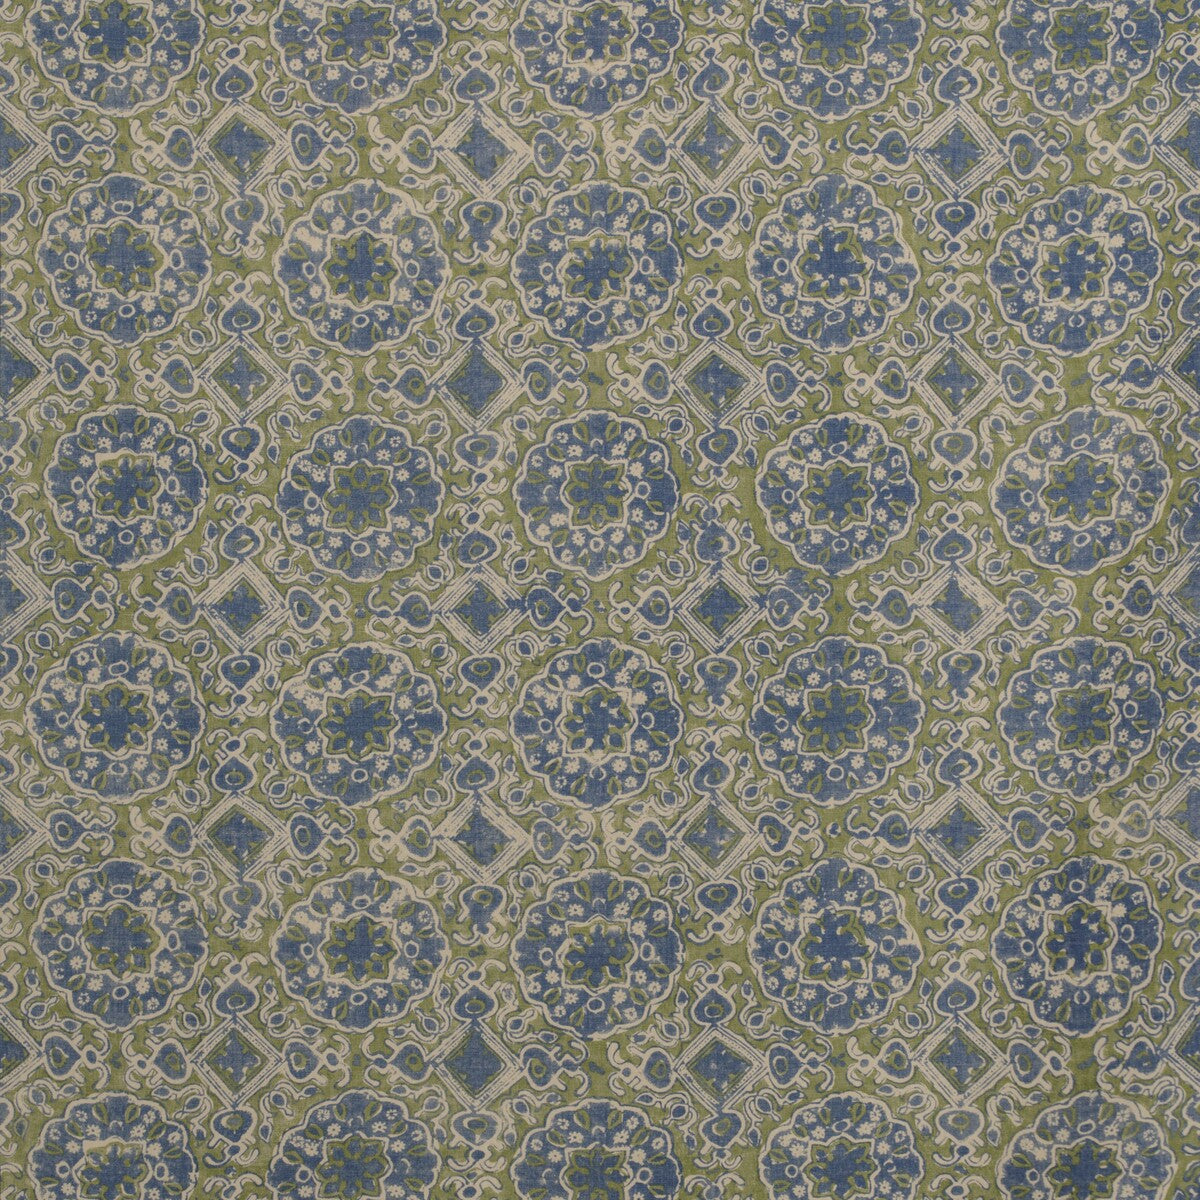 Ashcombe fabric in blue/green color - pattern BFC-3652.523.0 - by Lee Jofa in the Blithfield collection